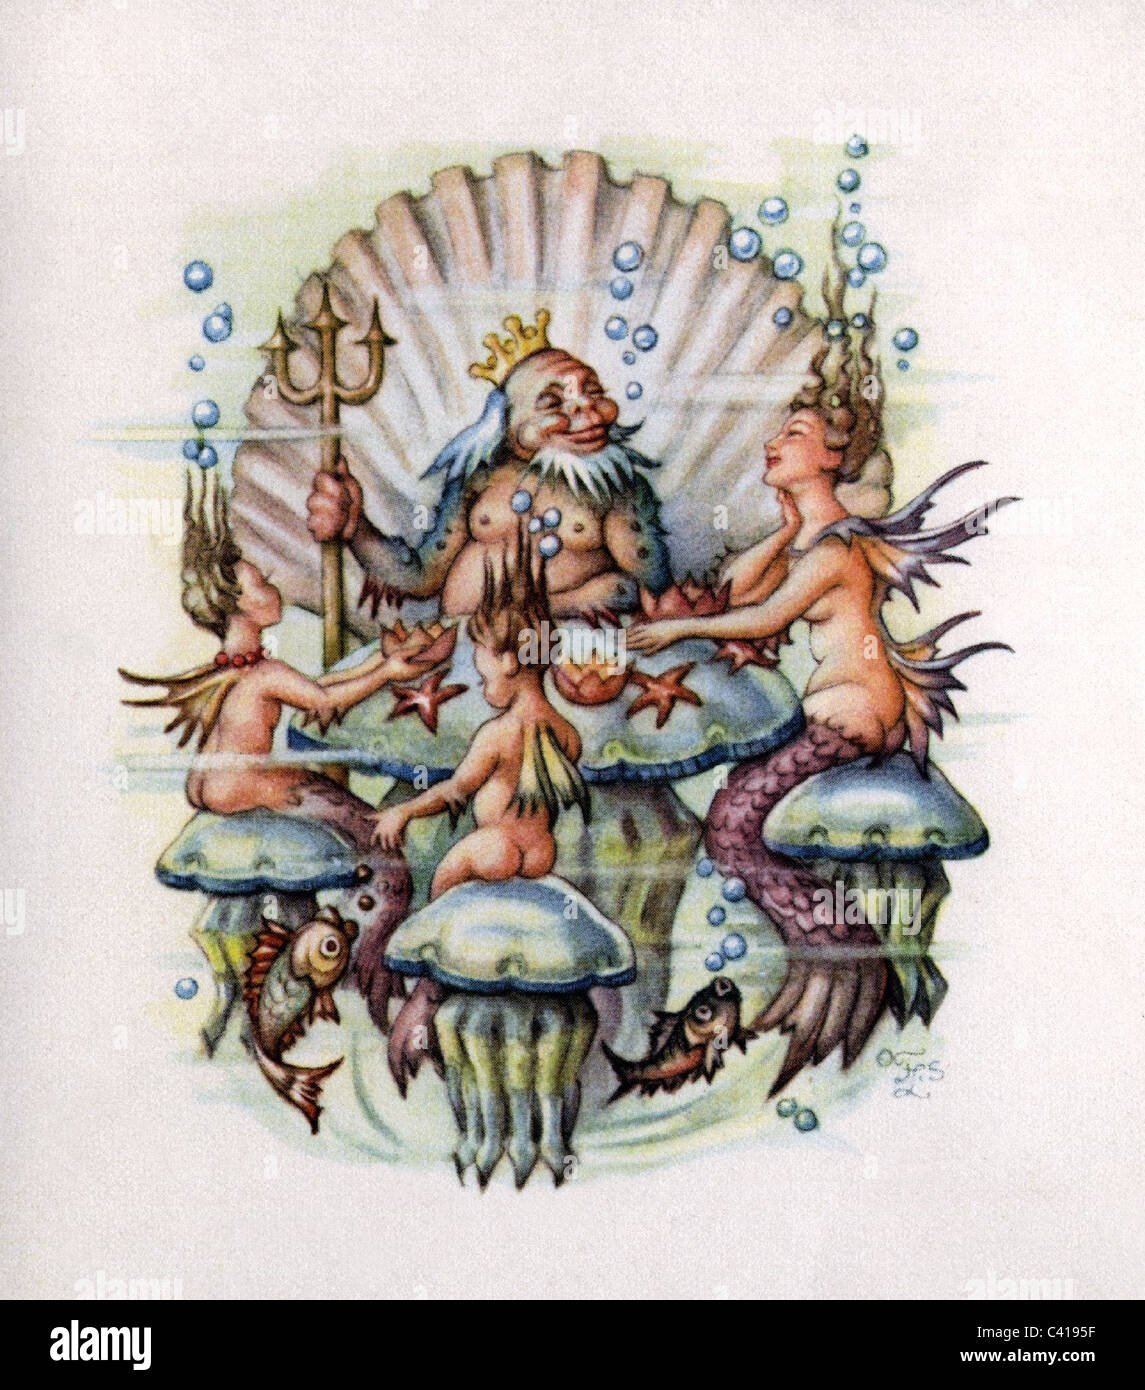 literature, fairytales, underwater creature, coloured drawing by F. L. S., historic, historical, legend, legends, mermaid, mermaids, merman, the Nix, mermen, fantasy, trident, fish, jellyfish, jellyfishes, Poseidon, Additional-Rights-Clearences-Not Available Stock Photo